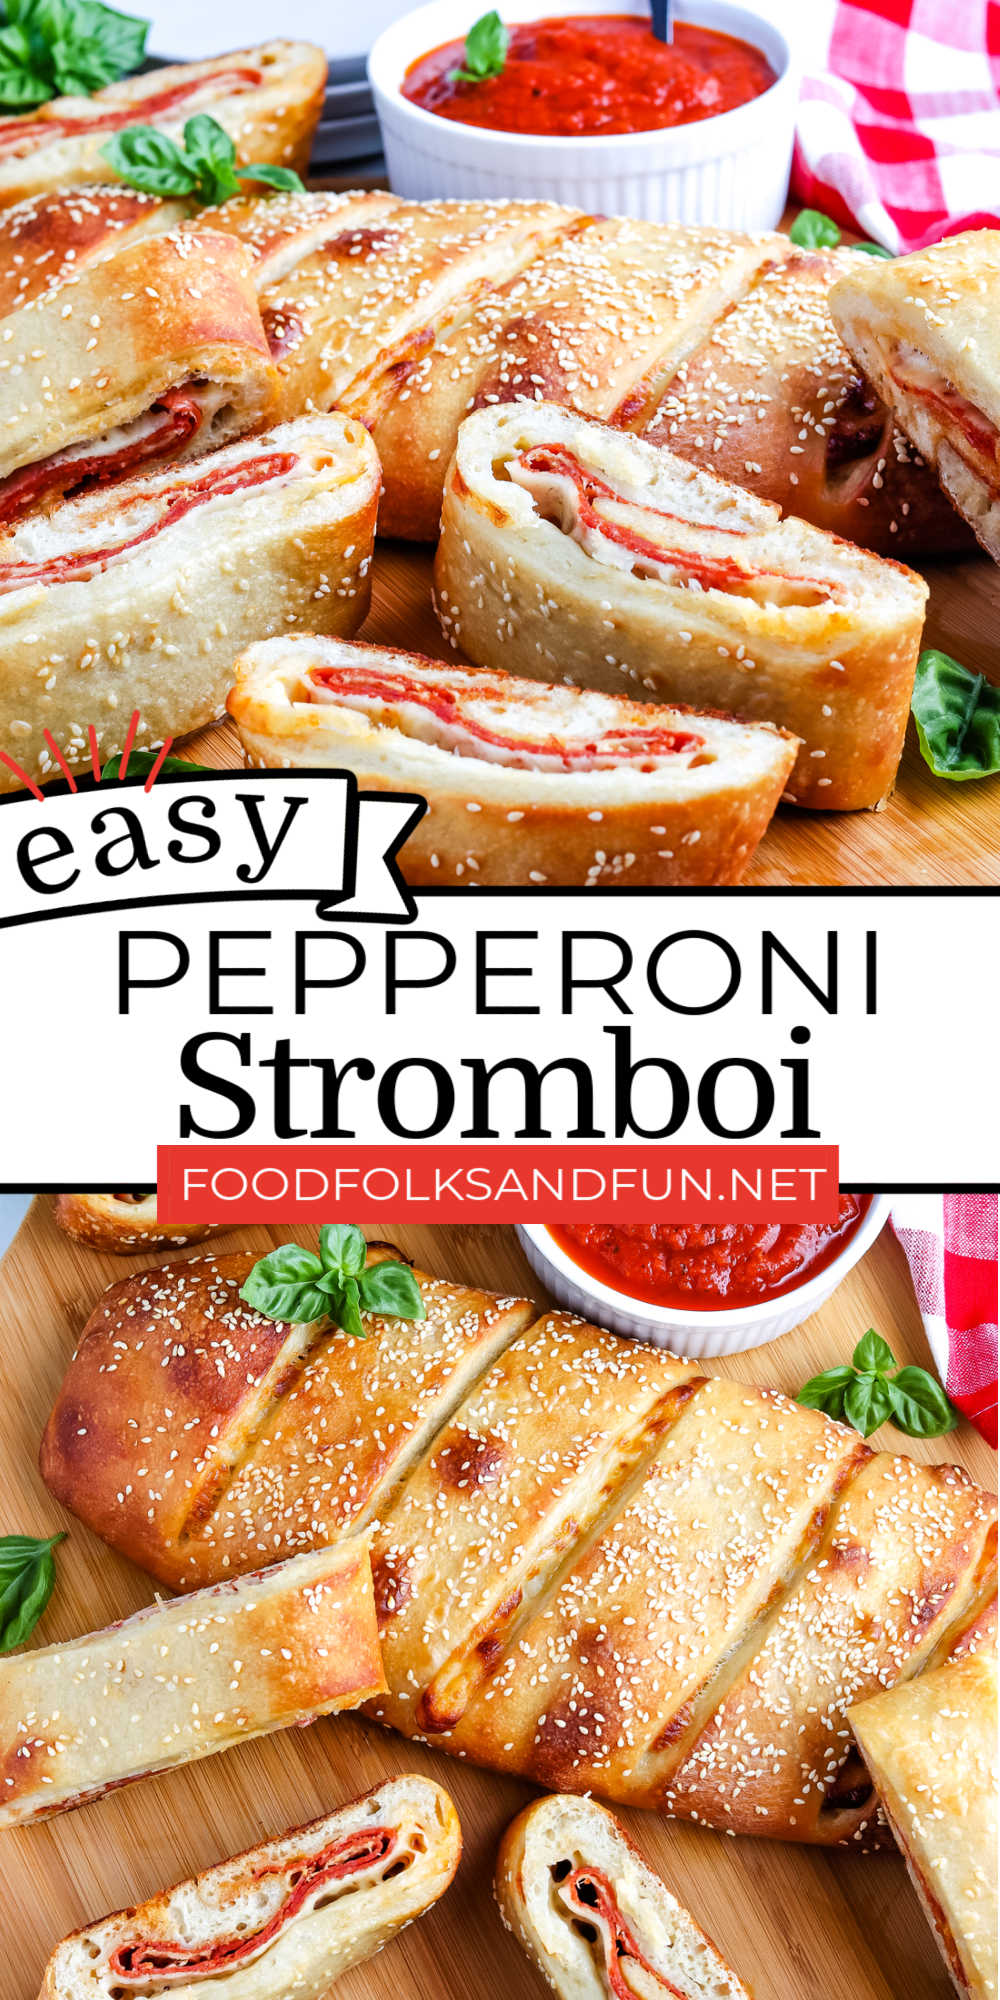 This Pepperoni Stromboli recipe is simple to make and easy to customize to your taste. Come see how to make stromboli in this easy-to-follow recipe!  via @foodfolksandfun